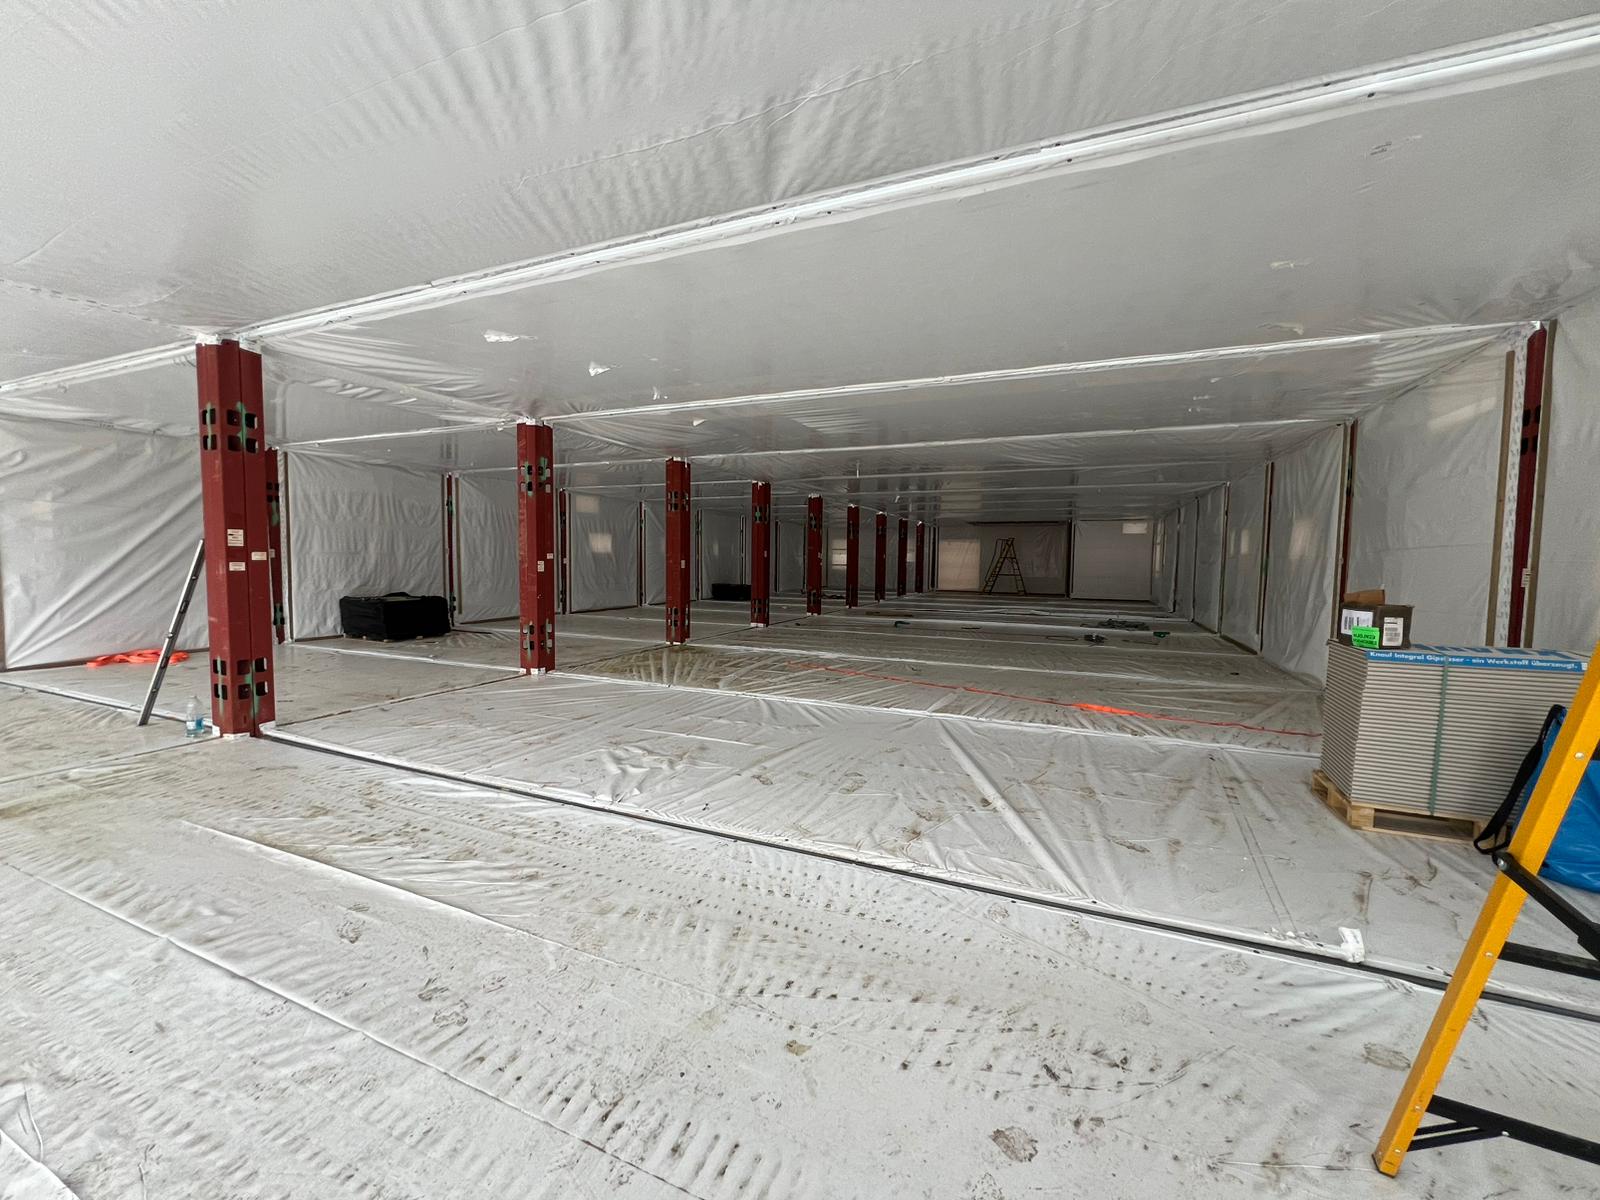 The inside of the modular elements is currently covered by a white protective covering, with red beams  